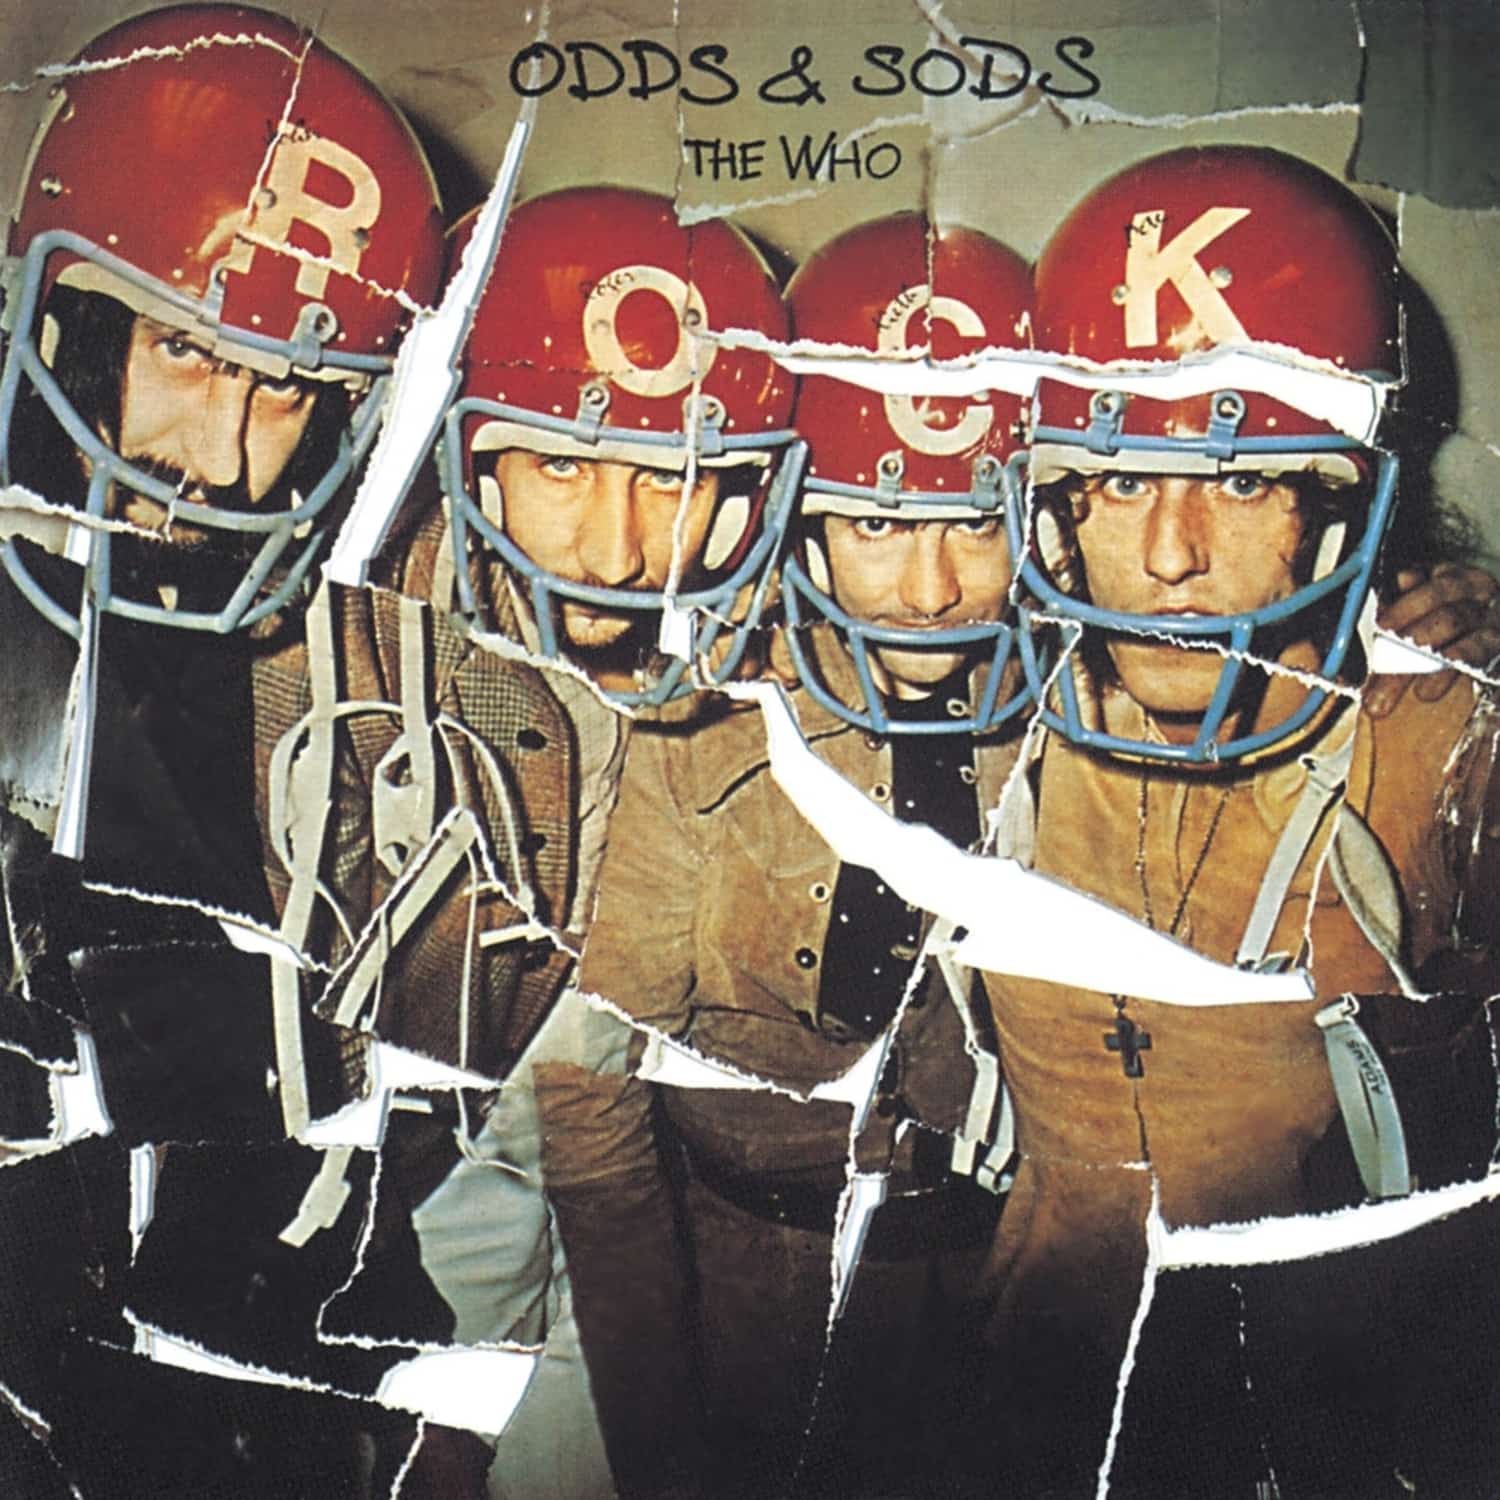 The Who - ODDS & SODS 